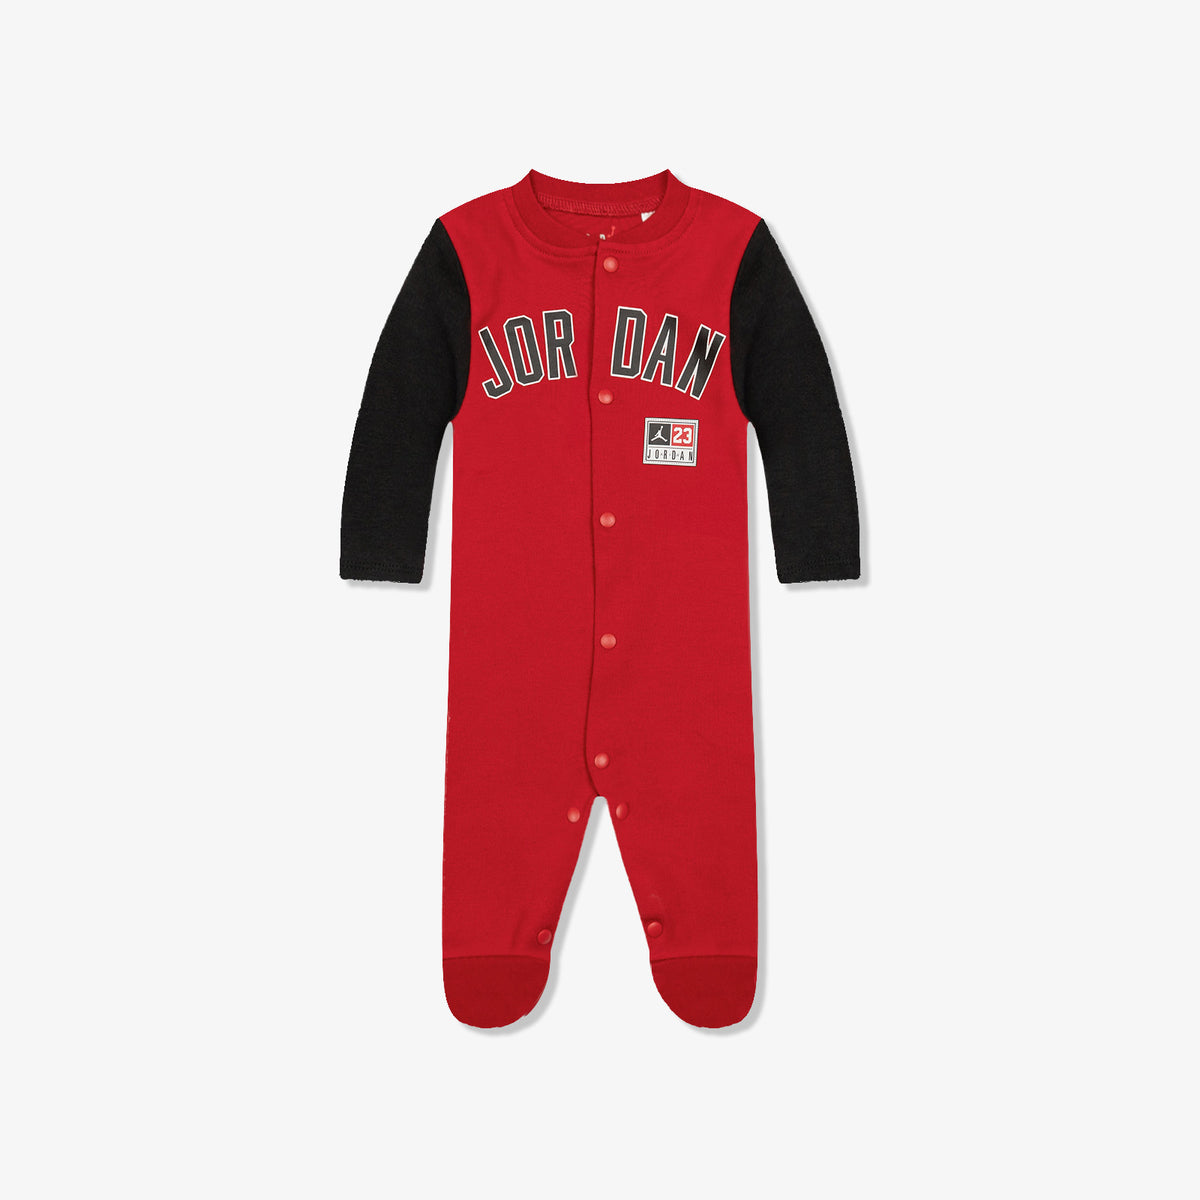 Jordan Footed Infant Coveralls - Gym Red